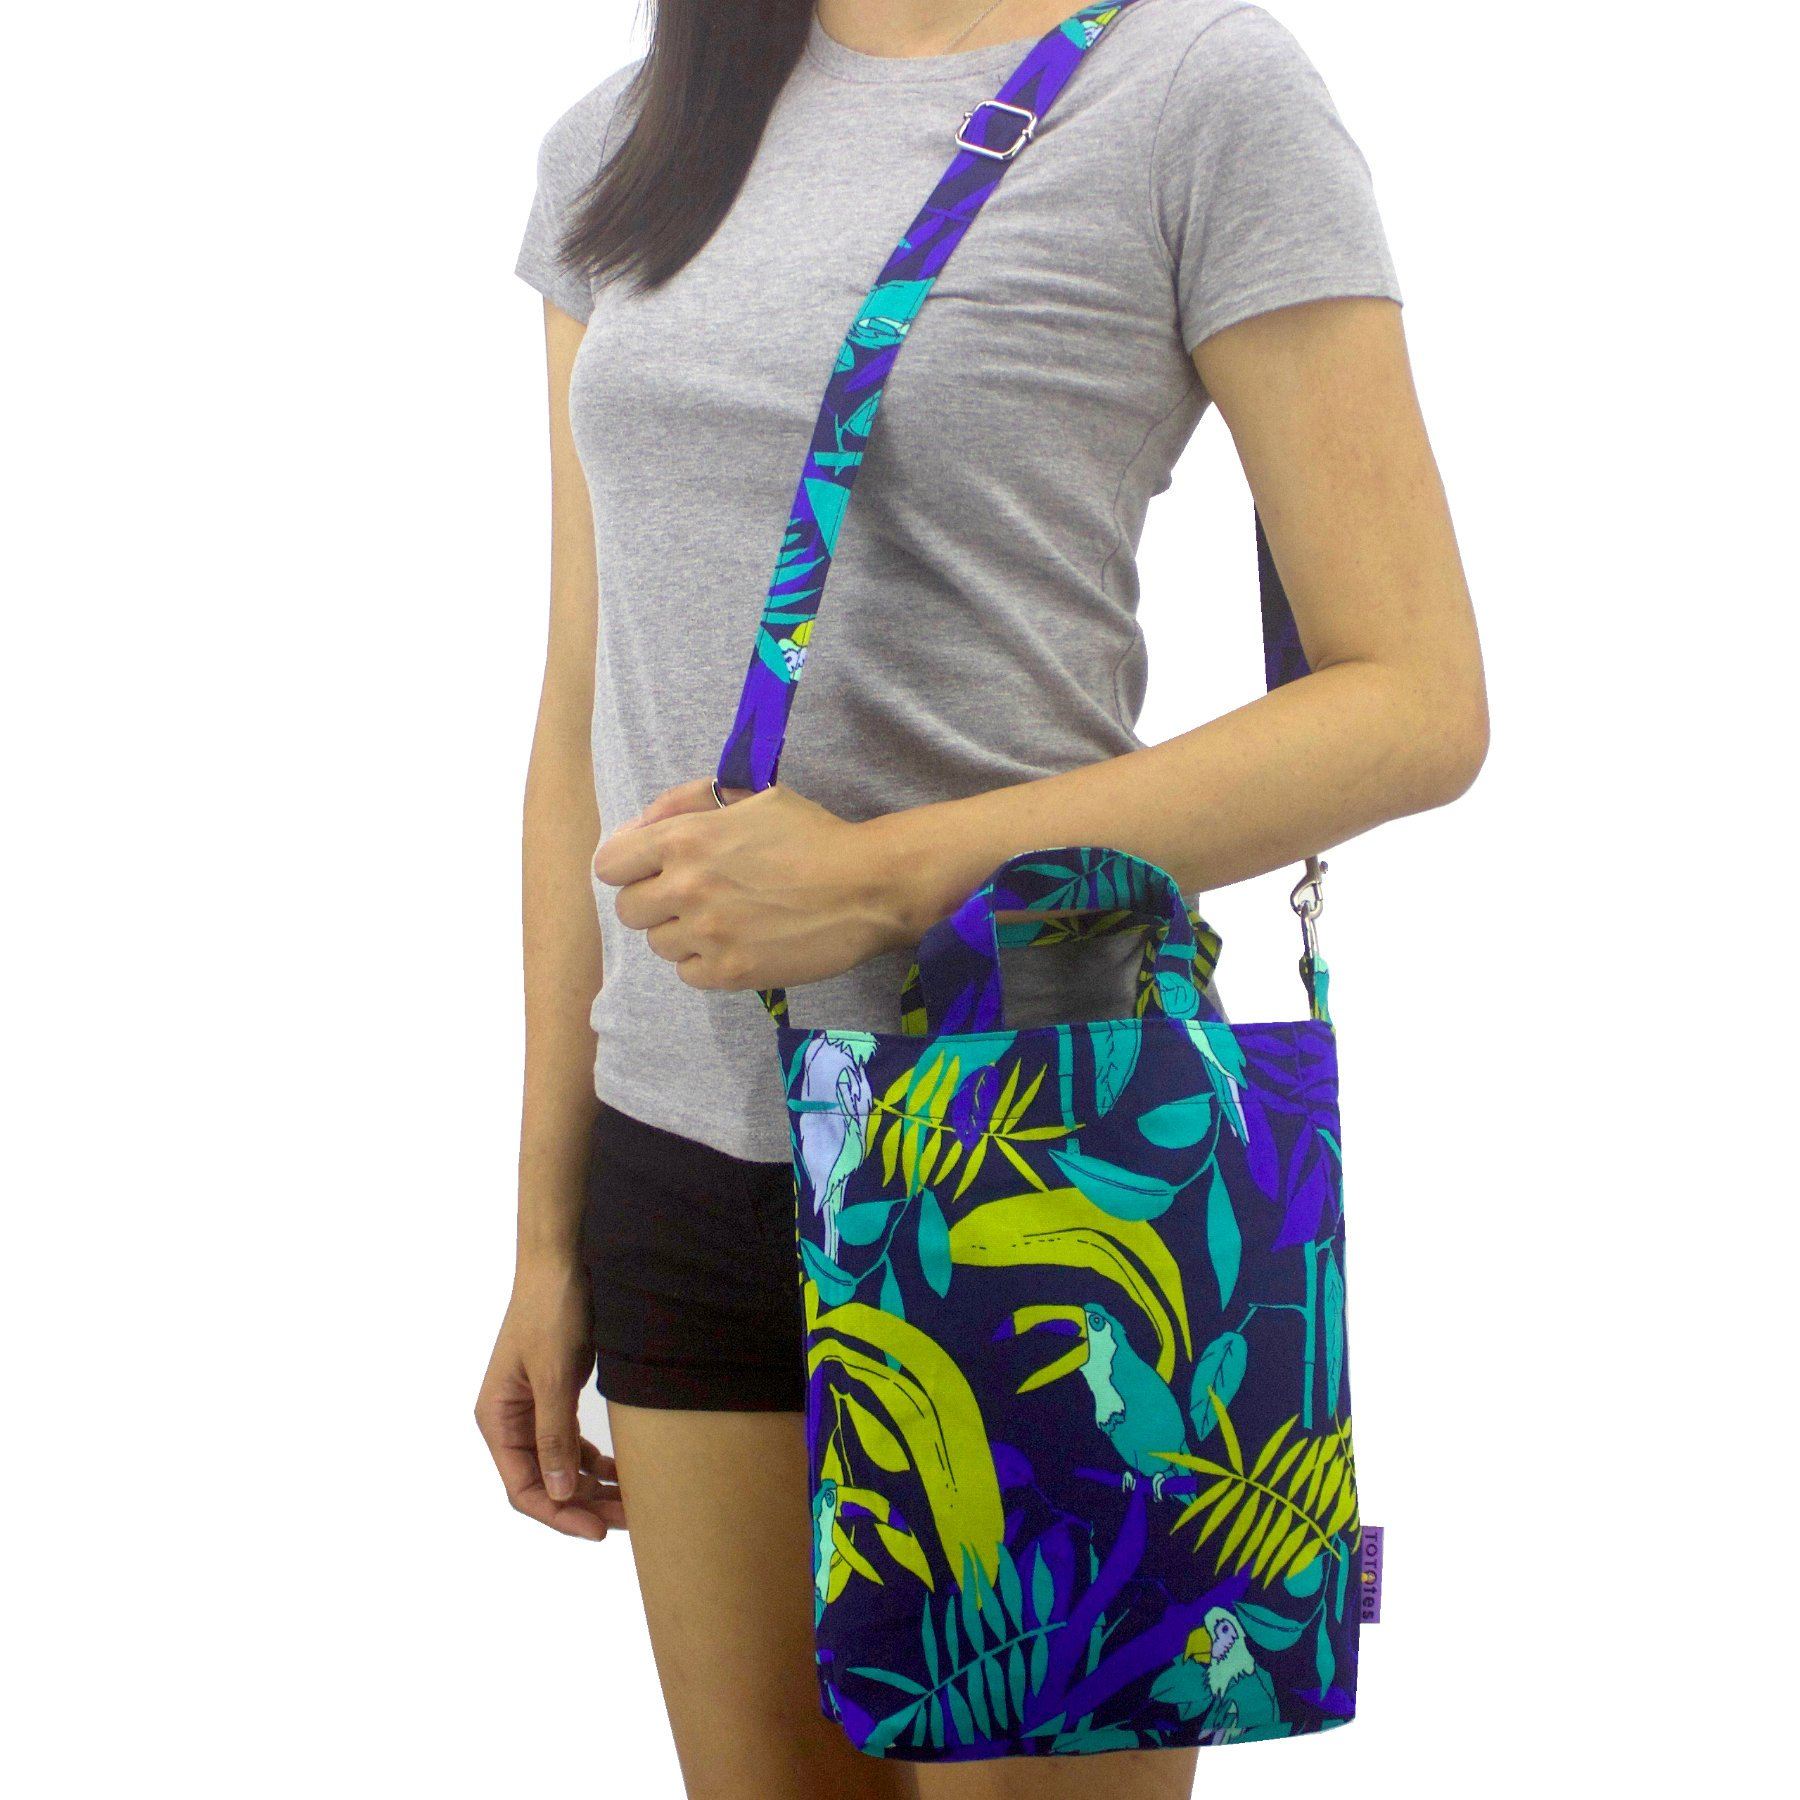 Blue Jungle Leaves Parrot Toucan Bird All Over Print Cotton Cross Body Duck Bag Tote